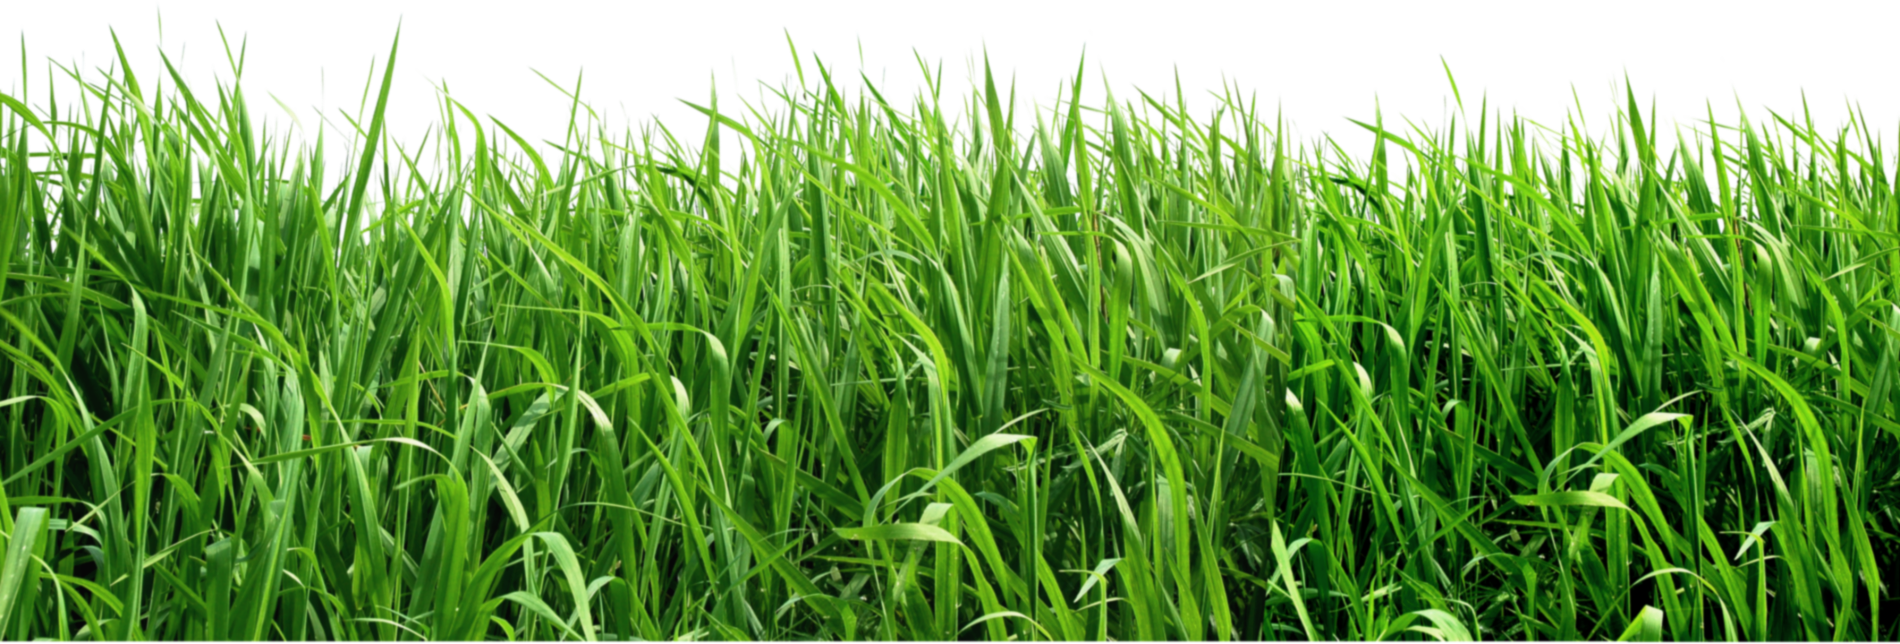 Grass border png. Clipart picture gallery yopriceville